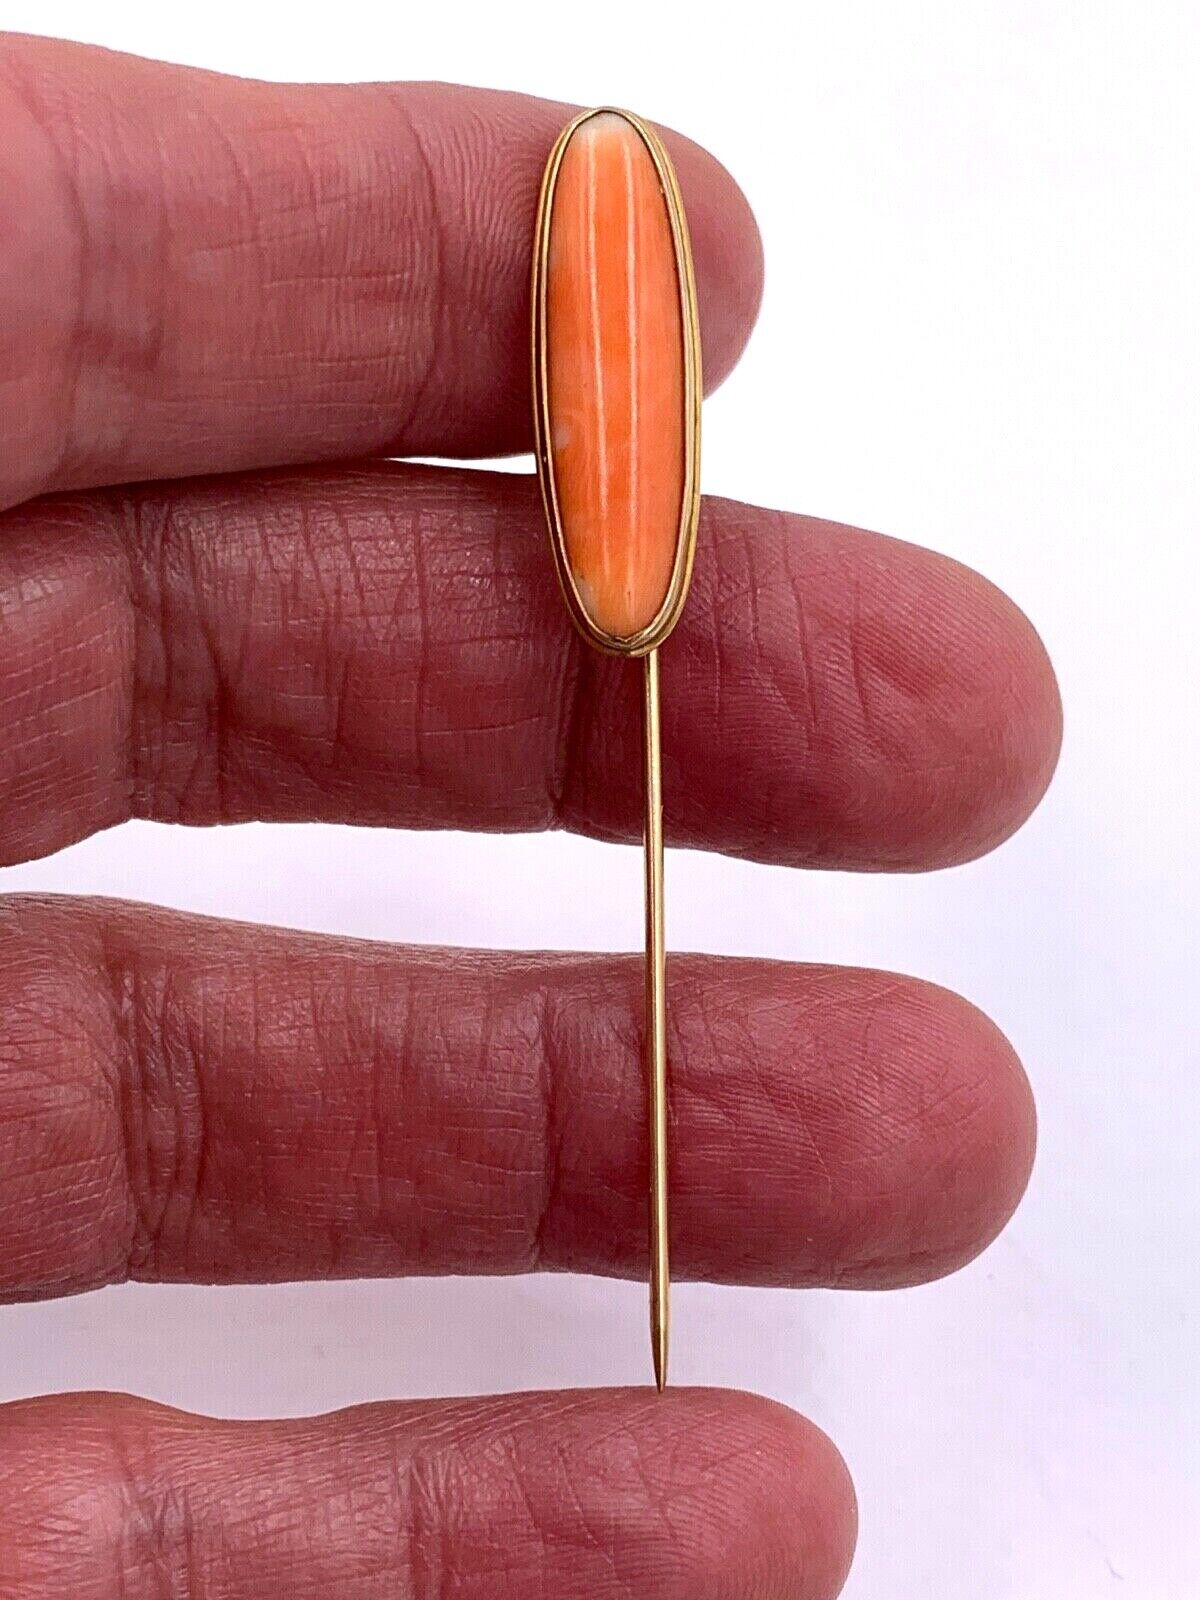 Antique 10K Yellow Gold Salmon Coral Lapel Pin stick hat pin Signed